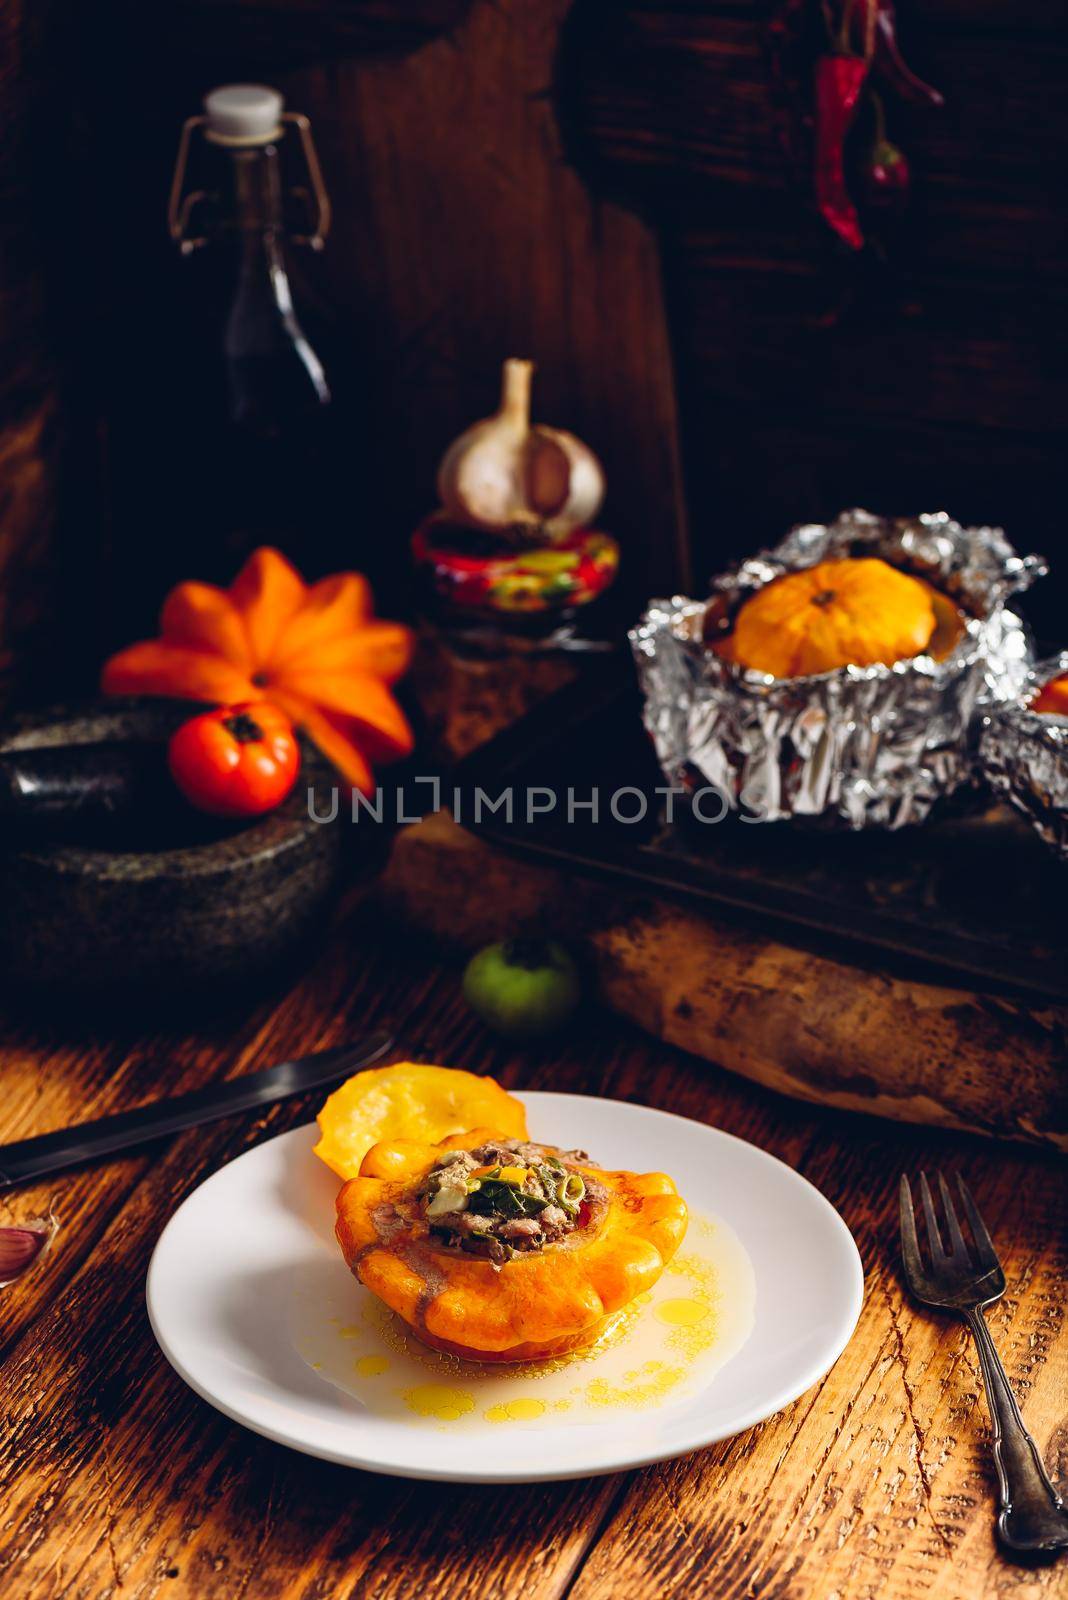 Filled pattypan squash on white plate over wooden rustic surface